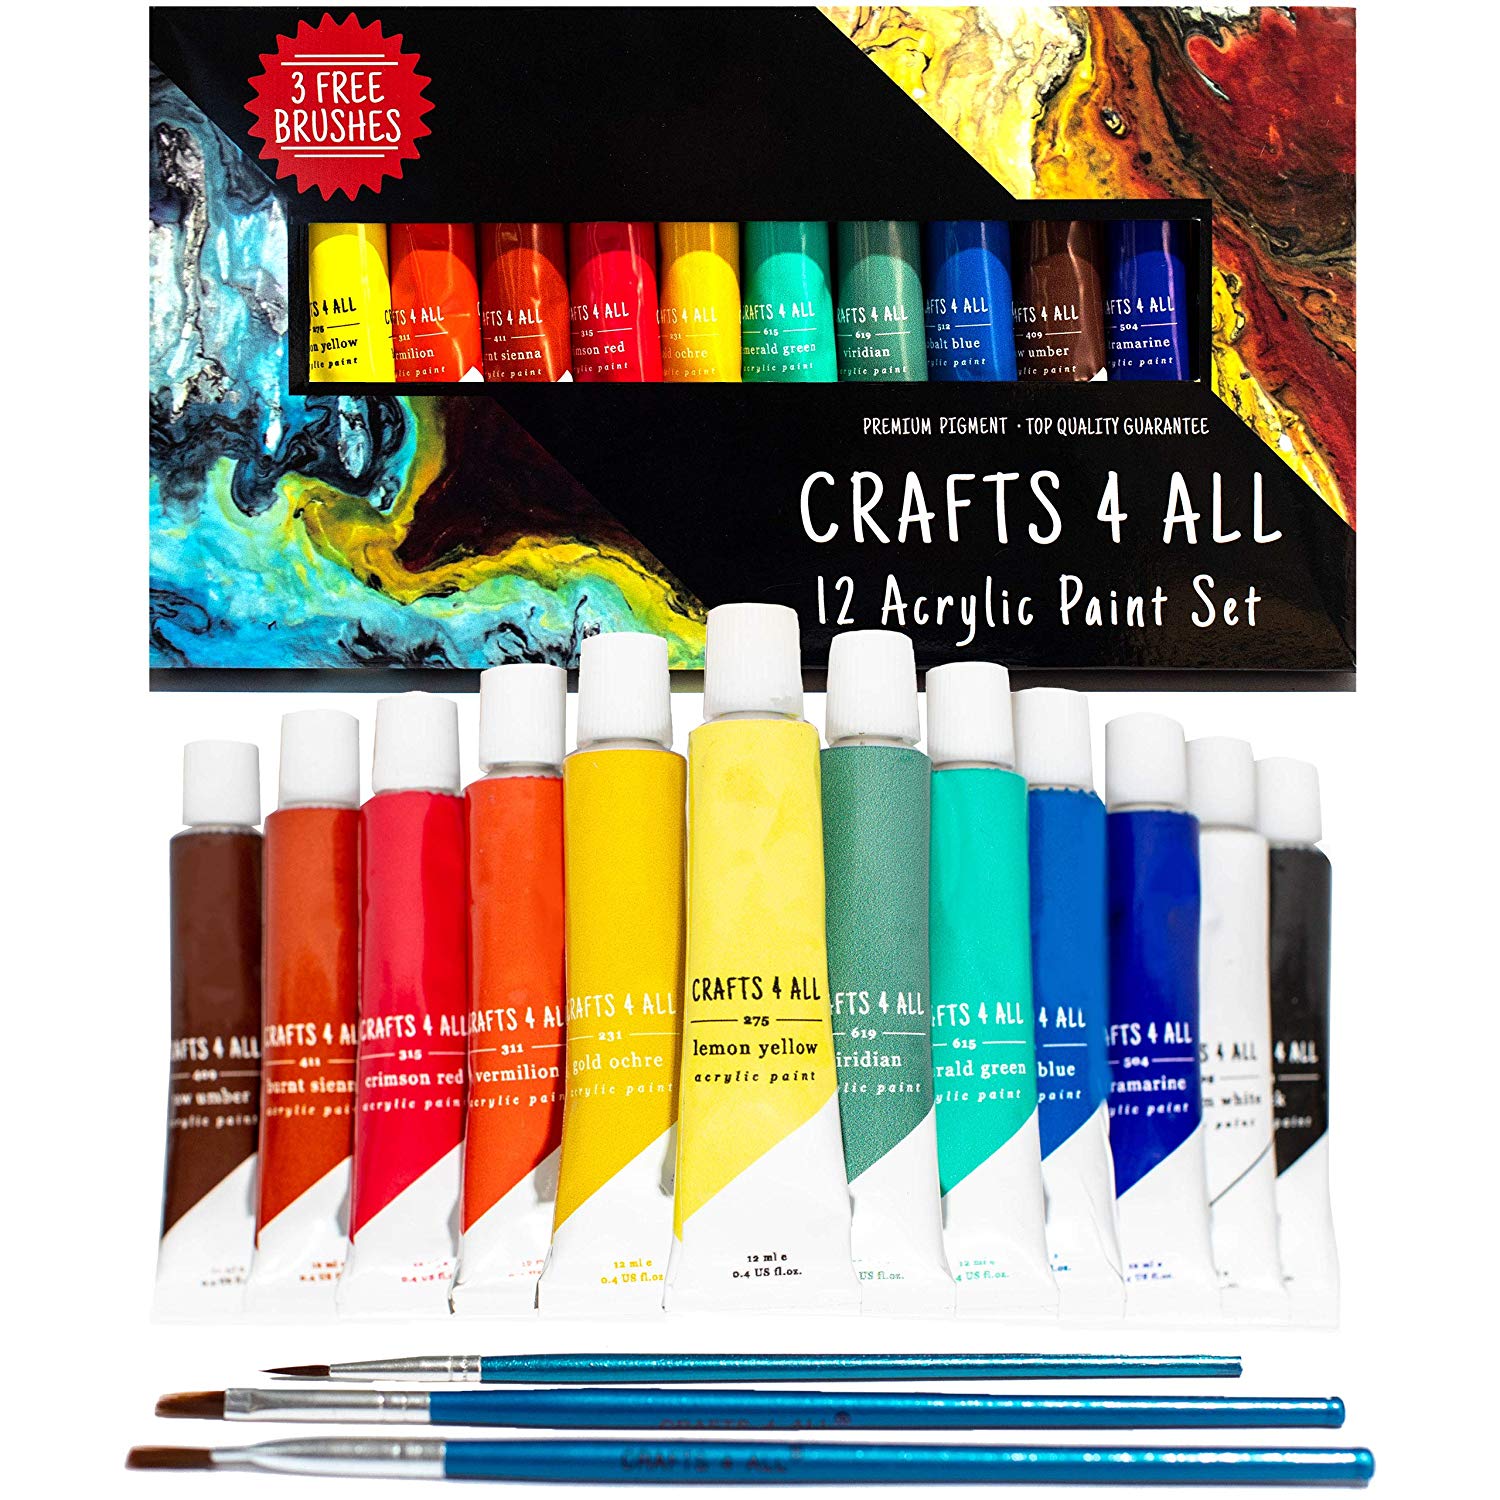 Crafts 4 ALL Acrylic Paint Set, 12 ct